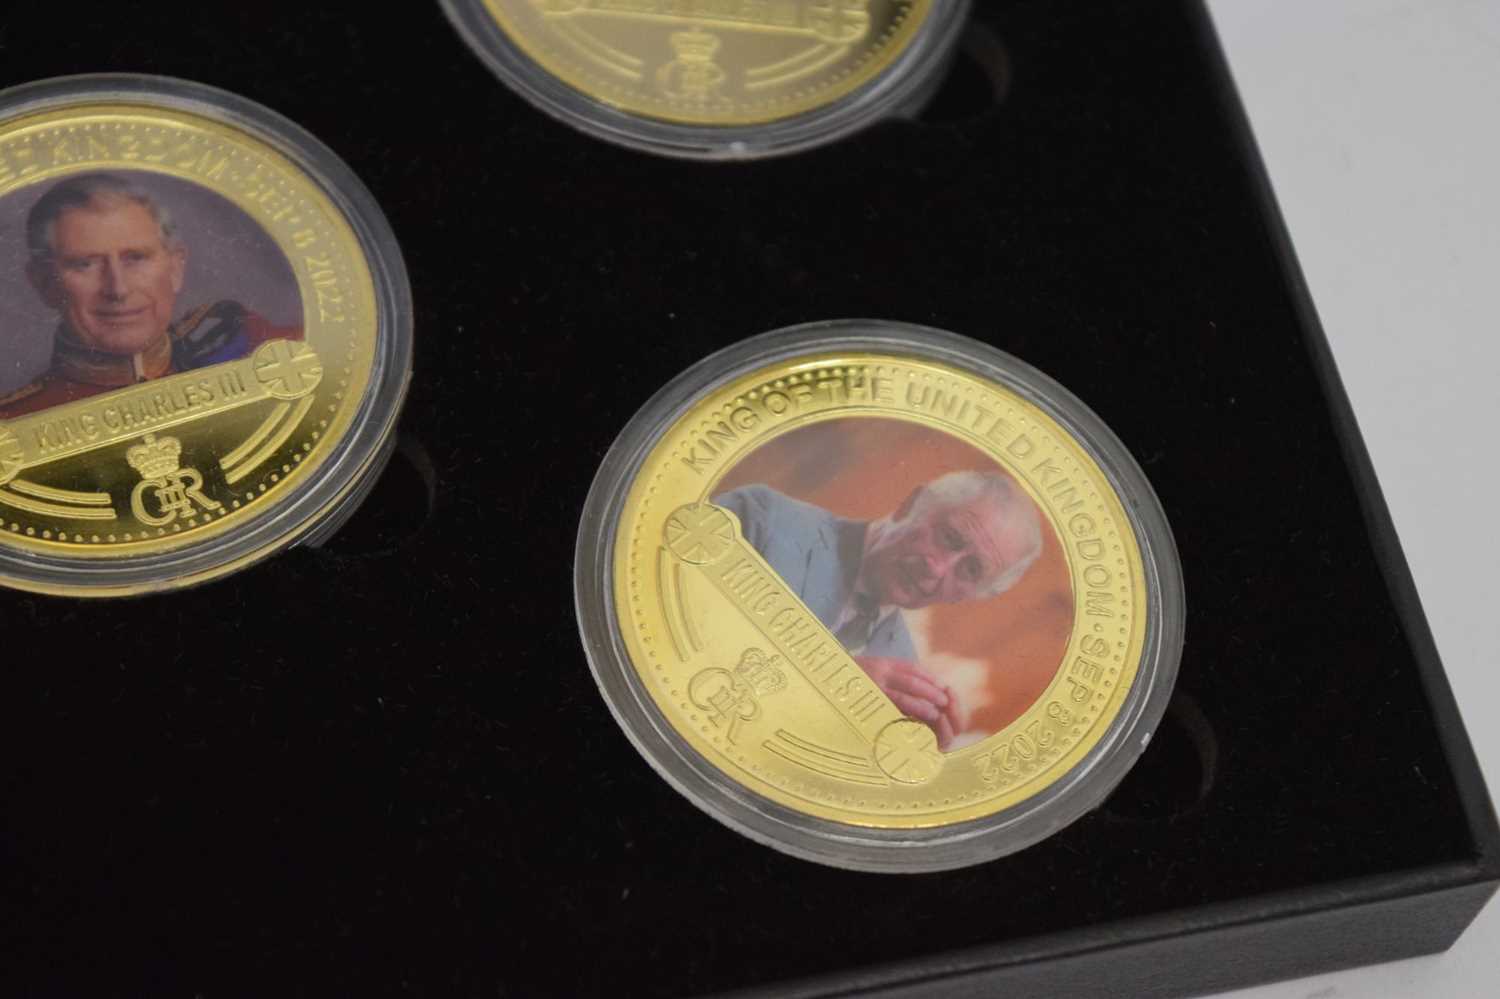 Gold-plated limited edition five-coin set commemorating Charles III - Image 7 of 7